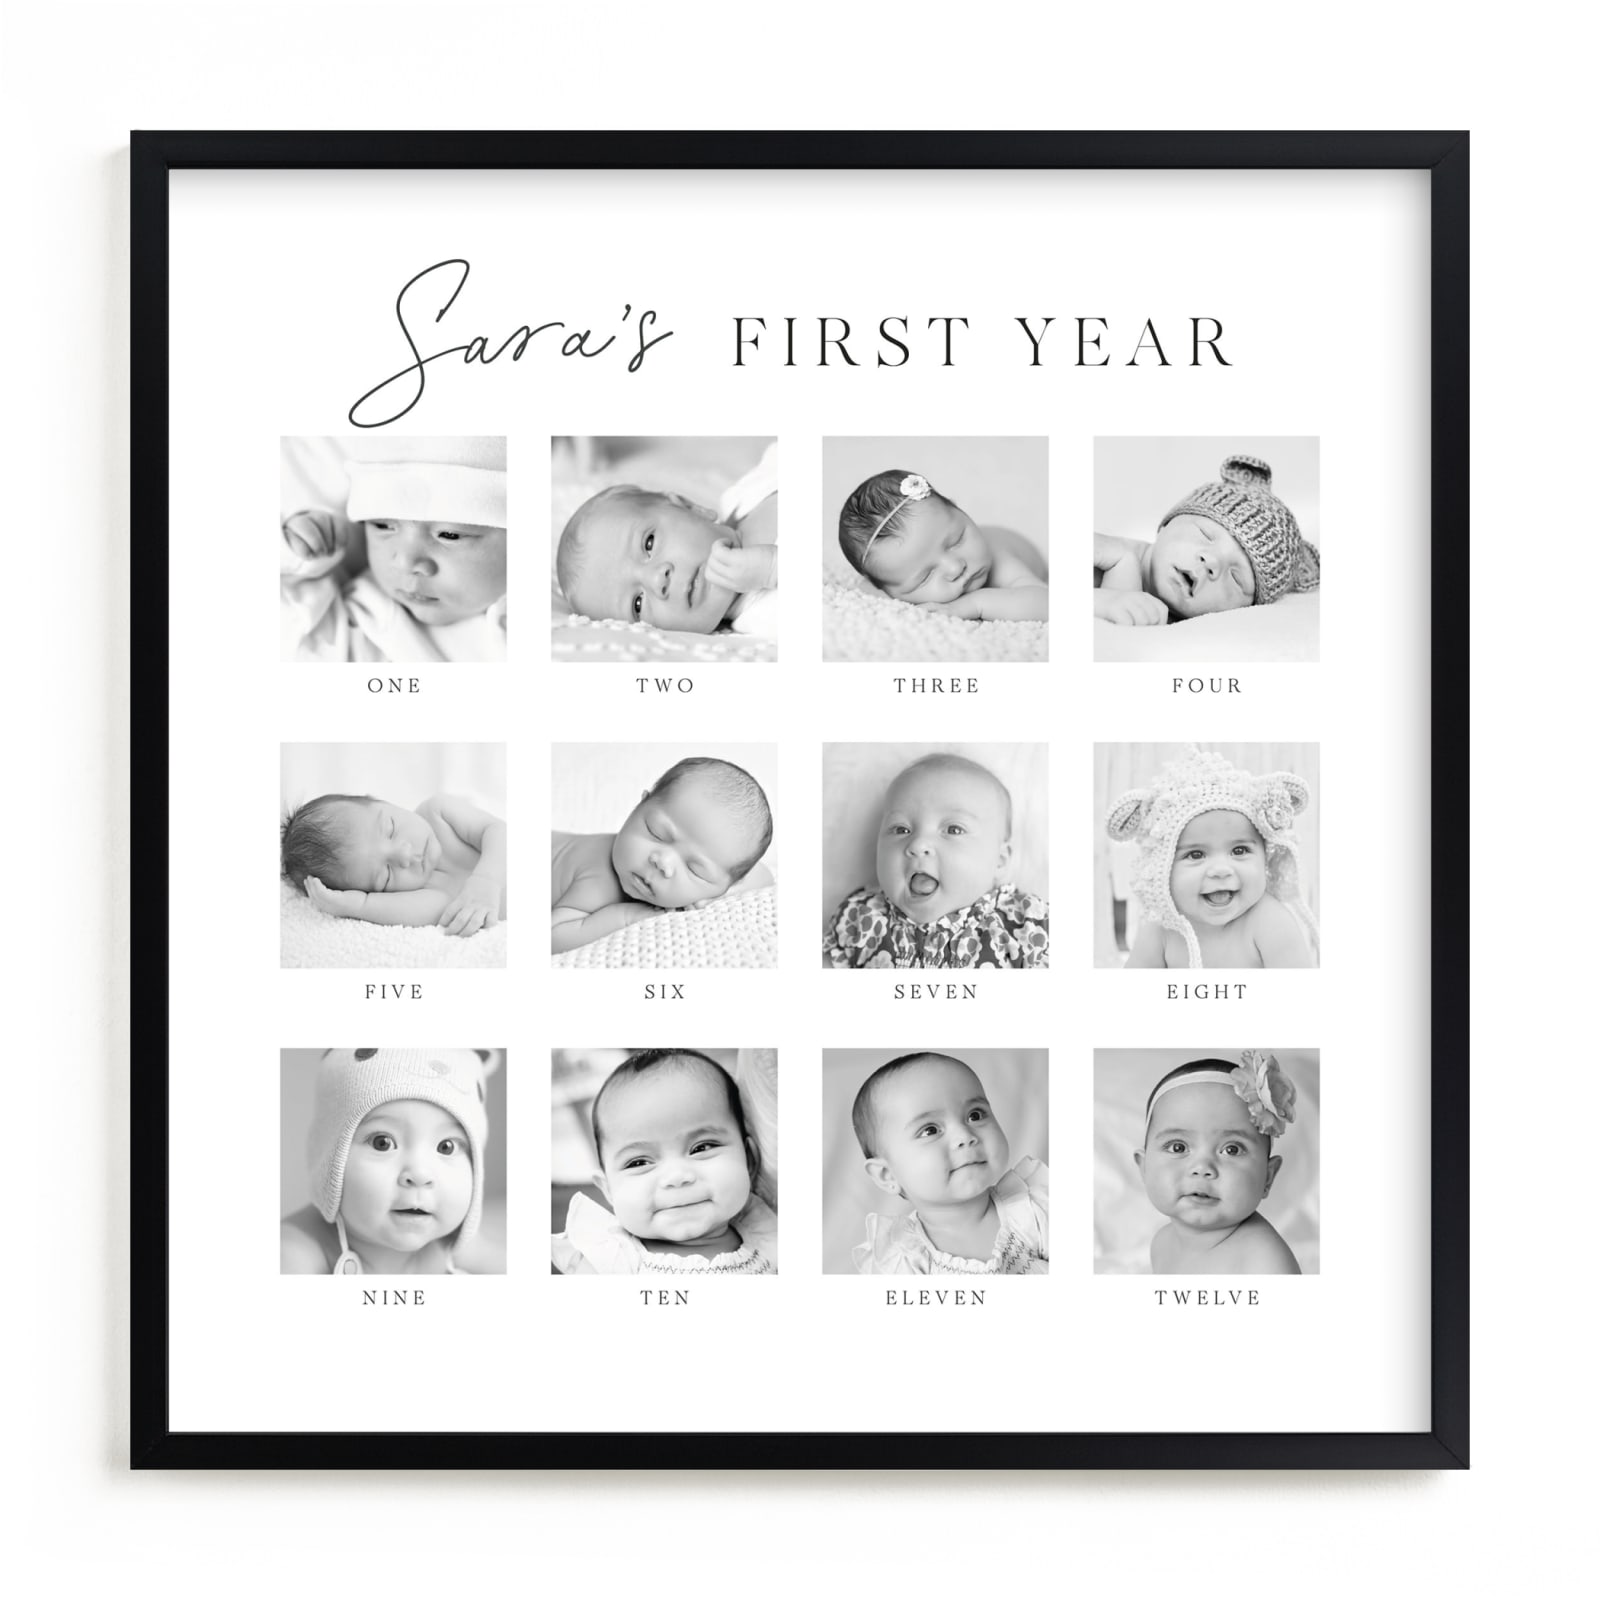 This is a black and white, white photo art by Erin Deegan called Baby's First Year.